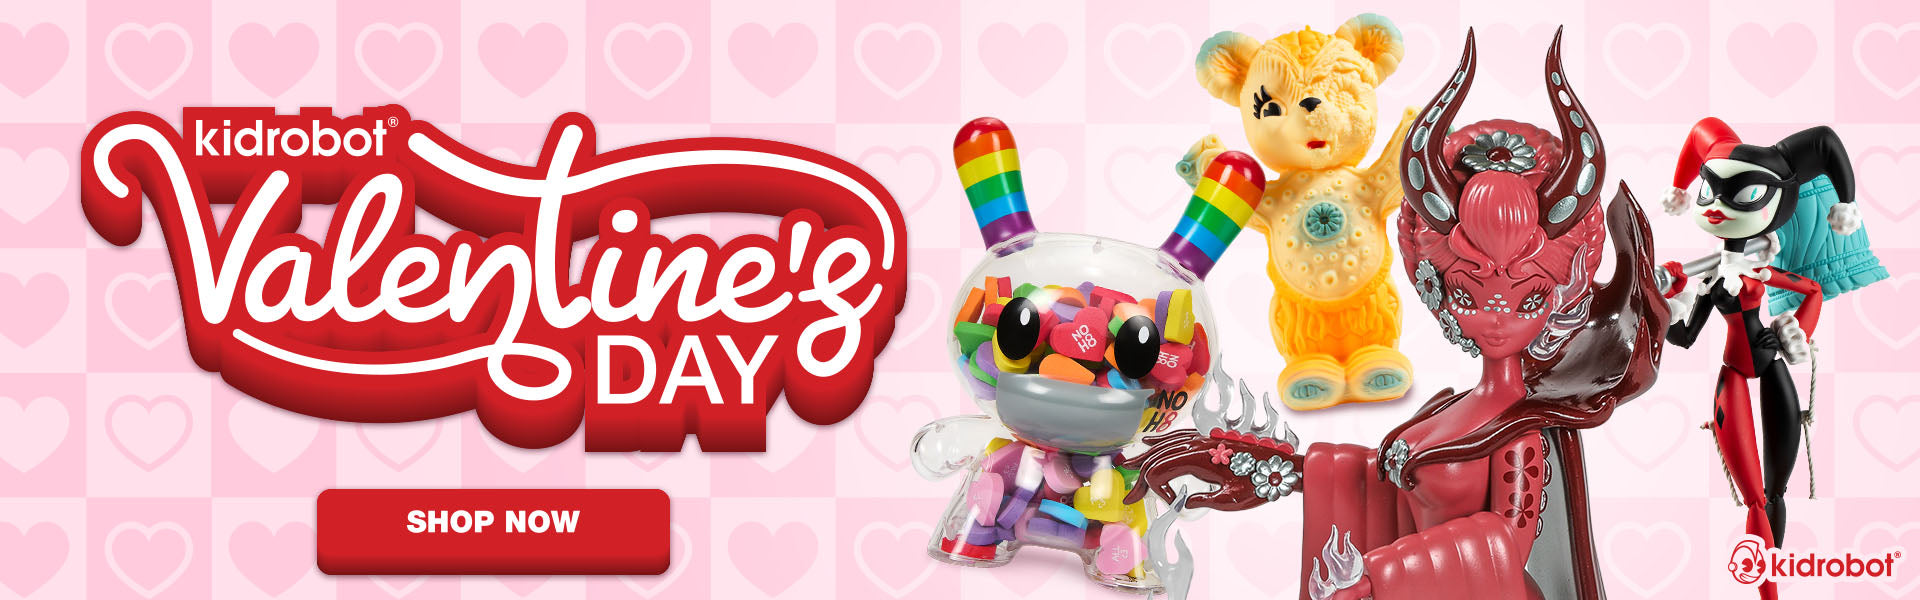 Shop the best Valentine's Day Gifts for Her in time at Kidrobot - Cute gifts, plush gifts and more